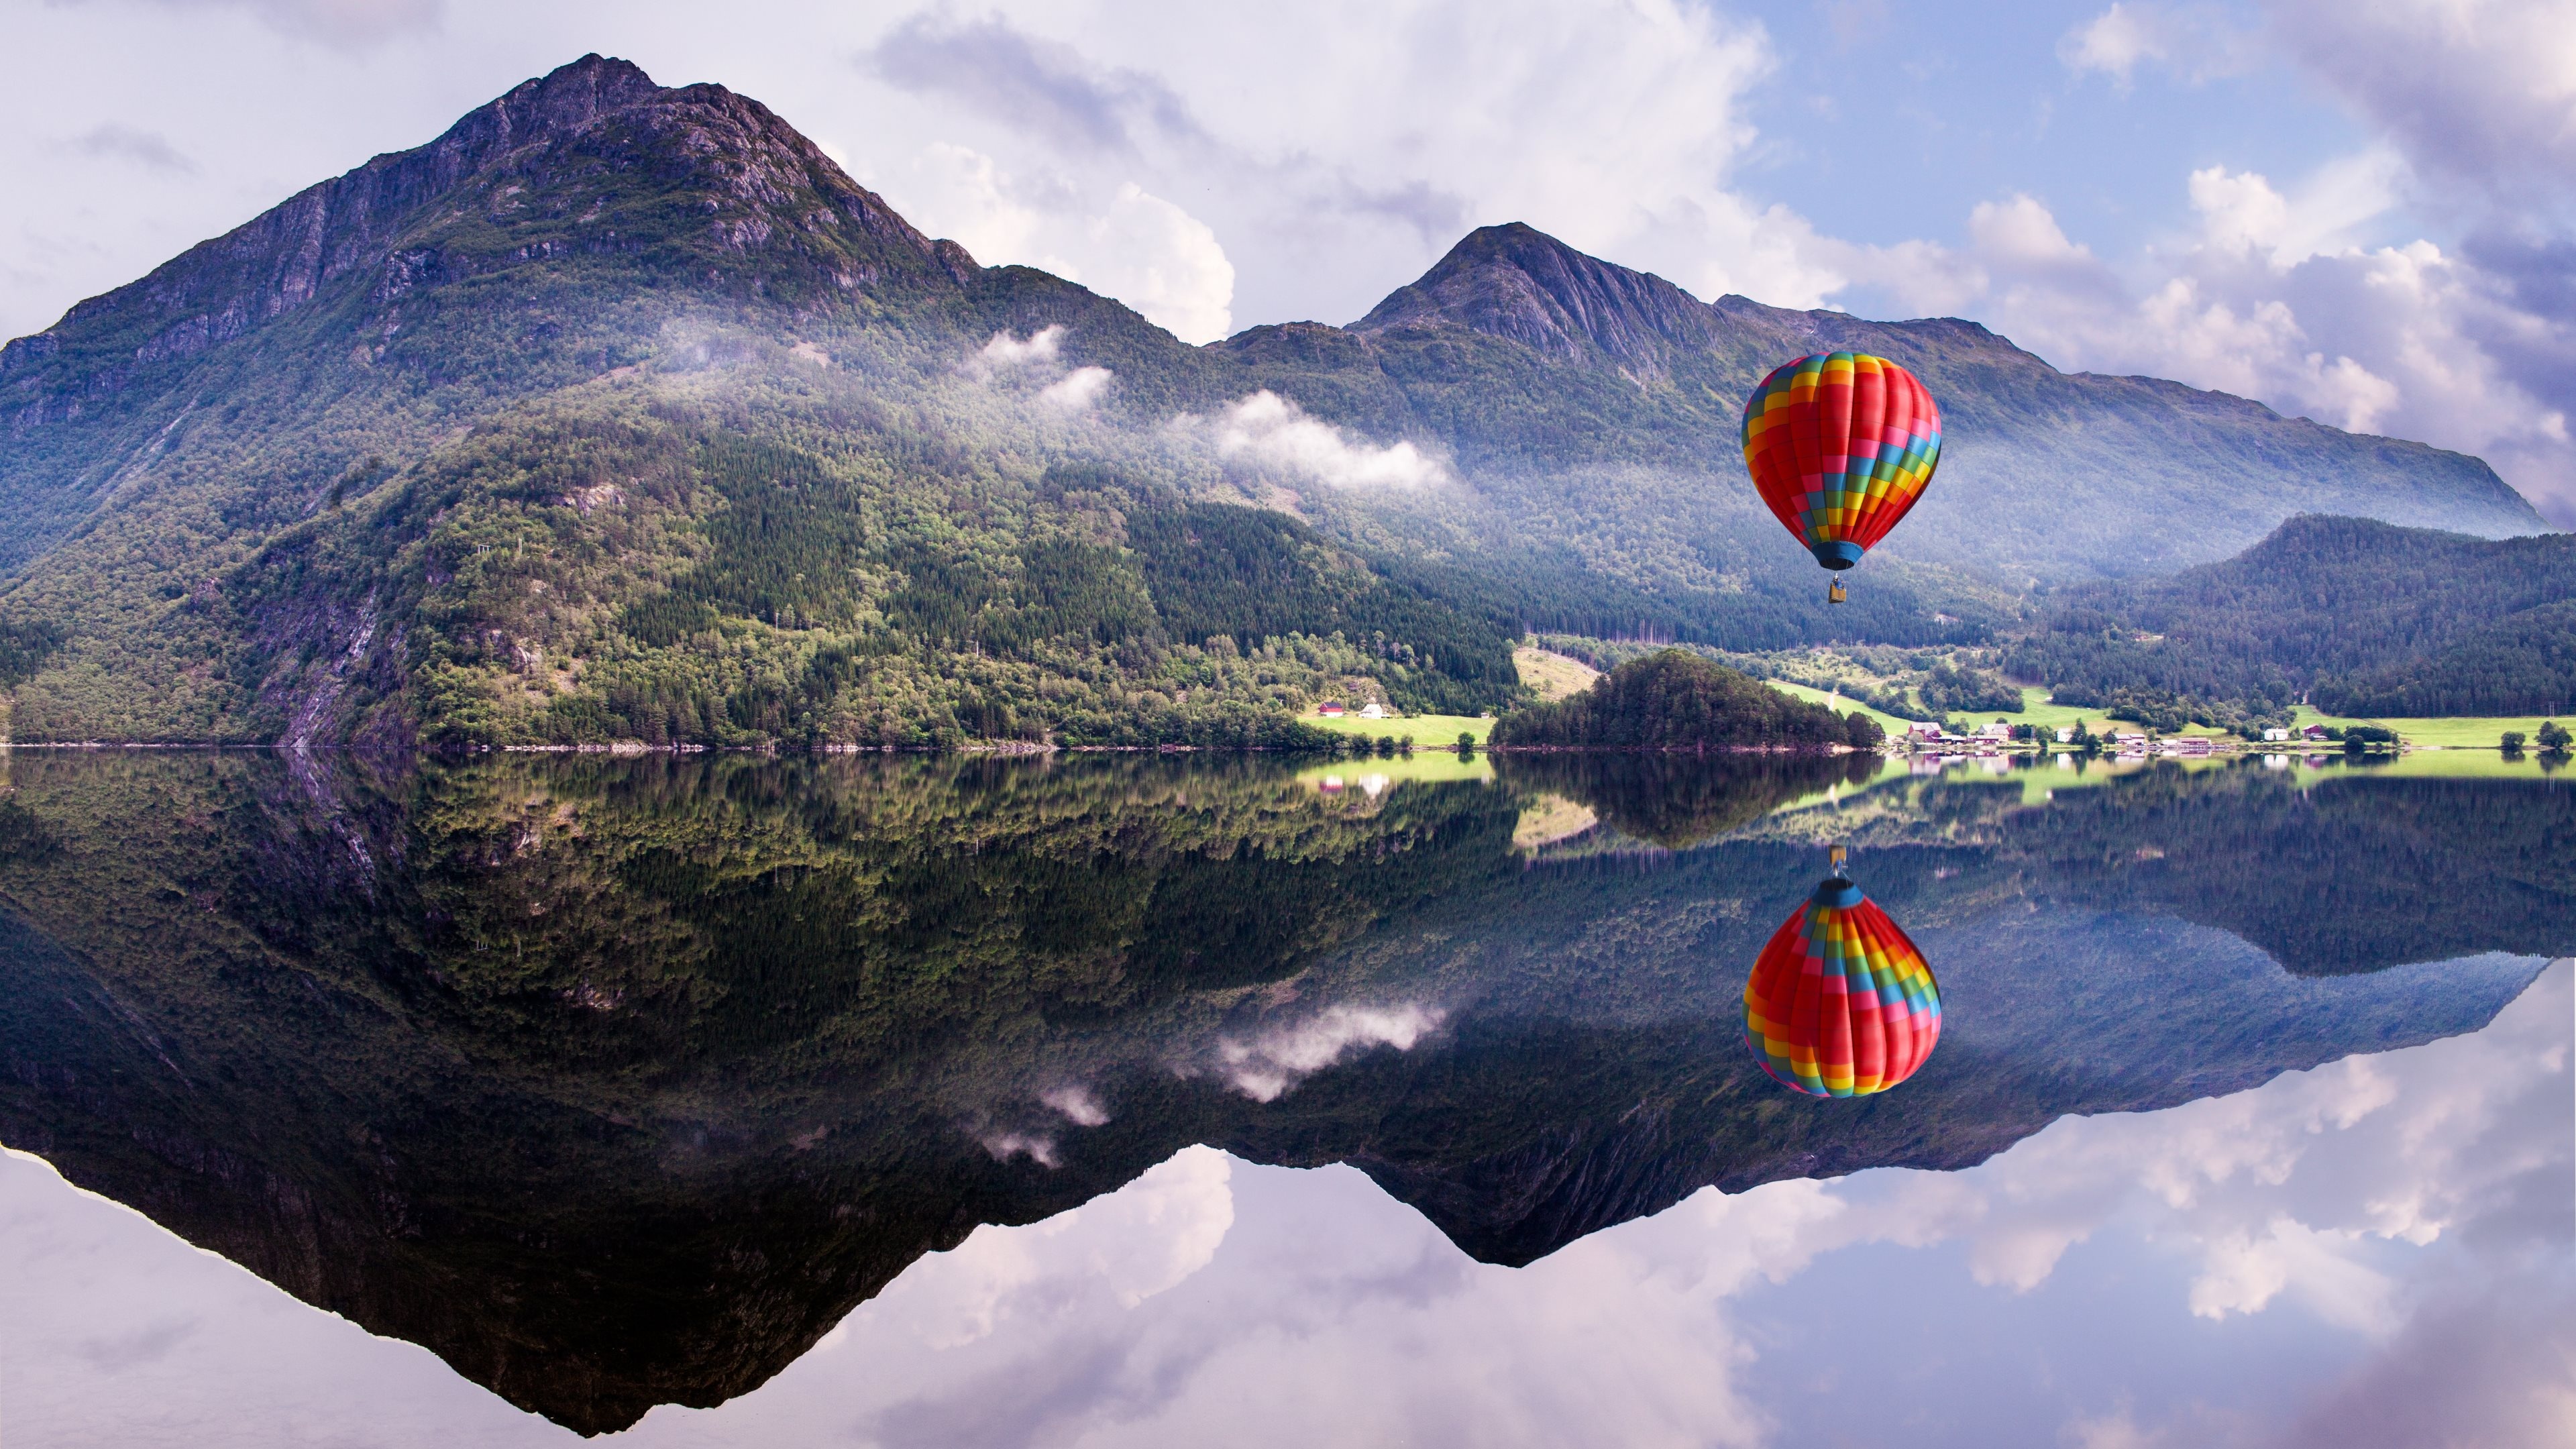 Hot Air Balloon: Ballooning Over The Lake, High Flight Excursion On The Aircraft. 3840x2160 4K Background.